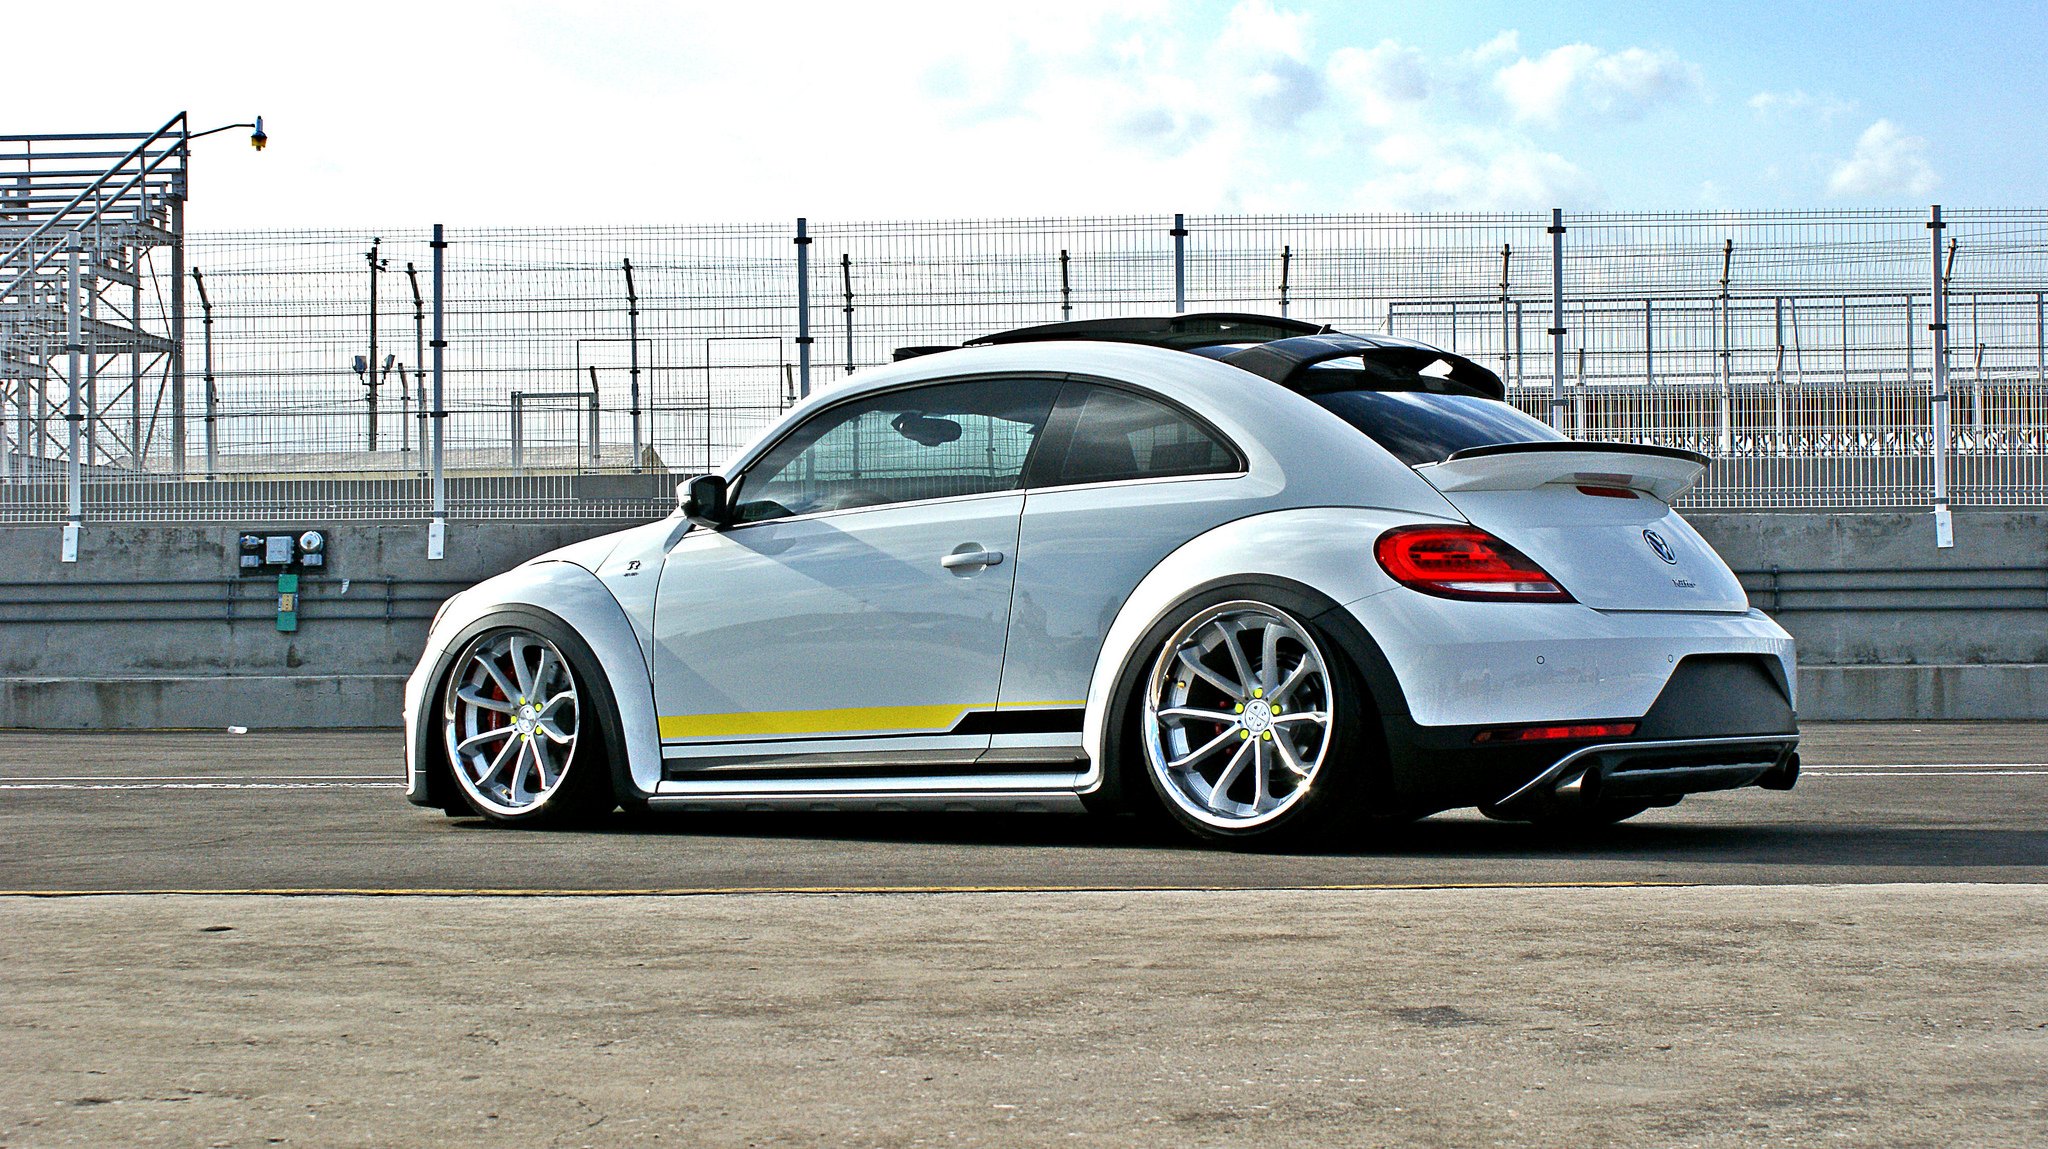 Aftermarket Rear Diffuser on White VW Beetle - Photo by Blaque Diamond Wheels